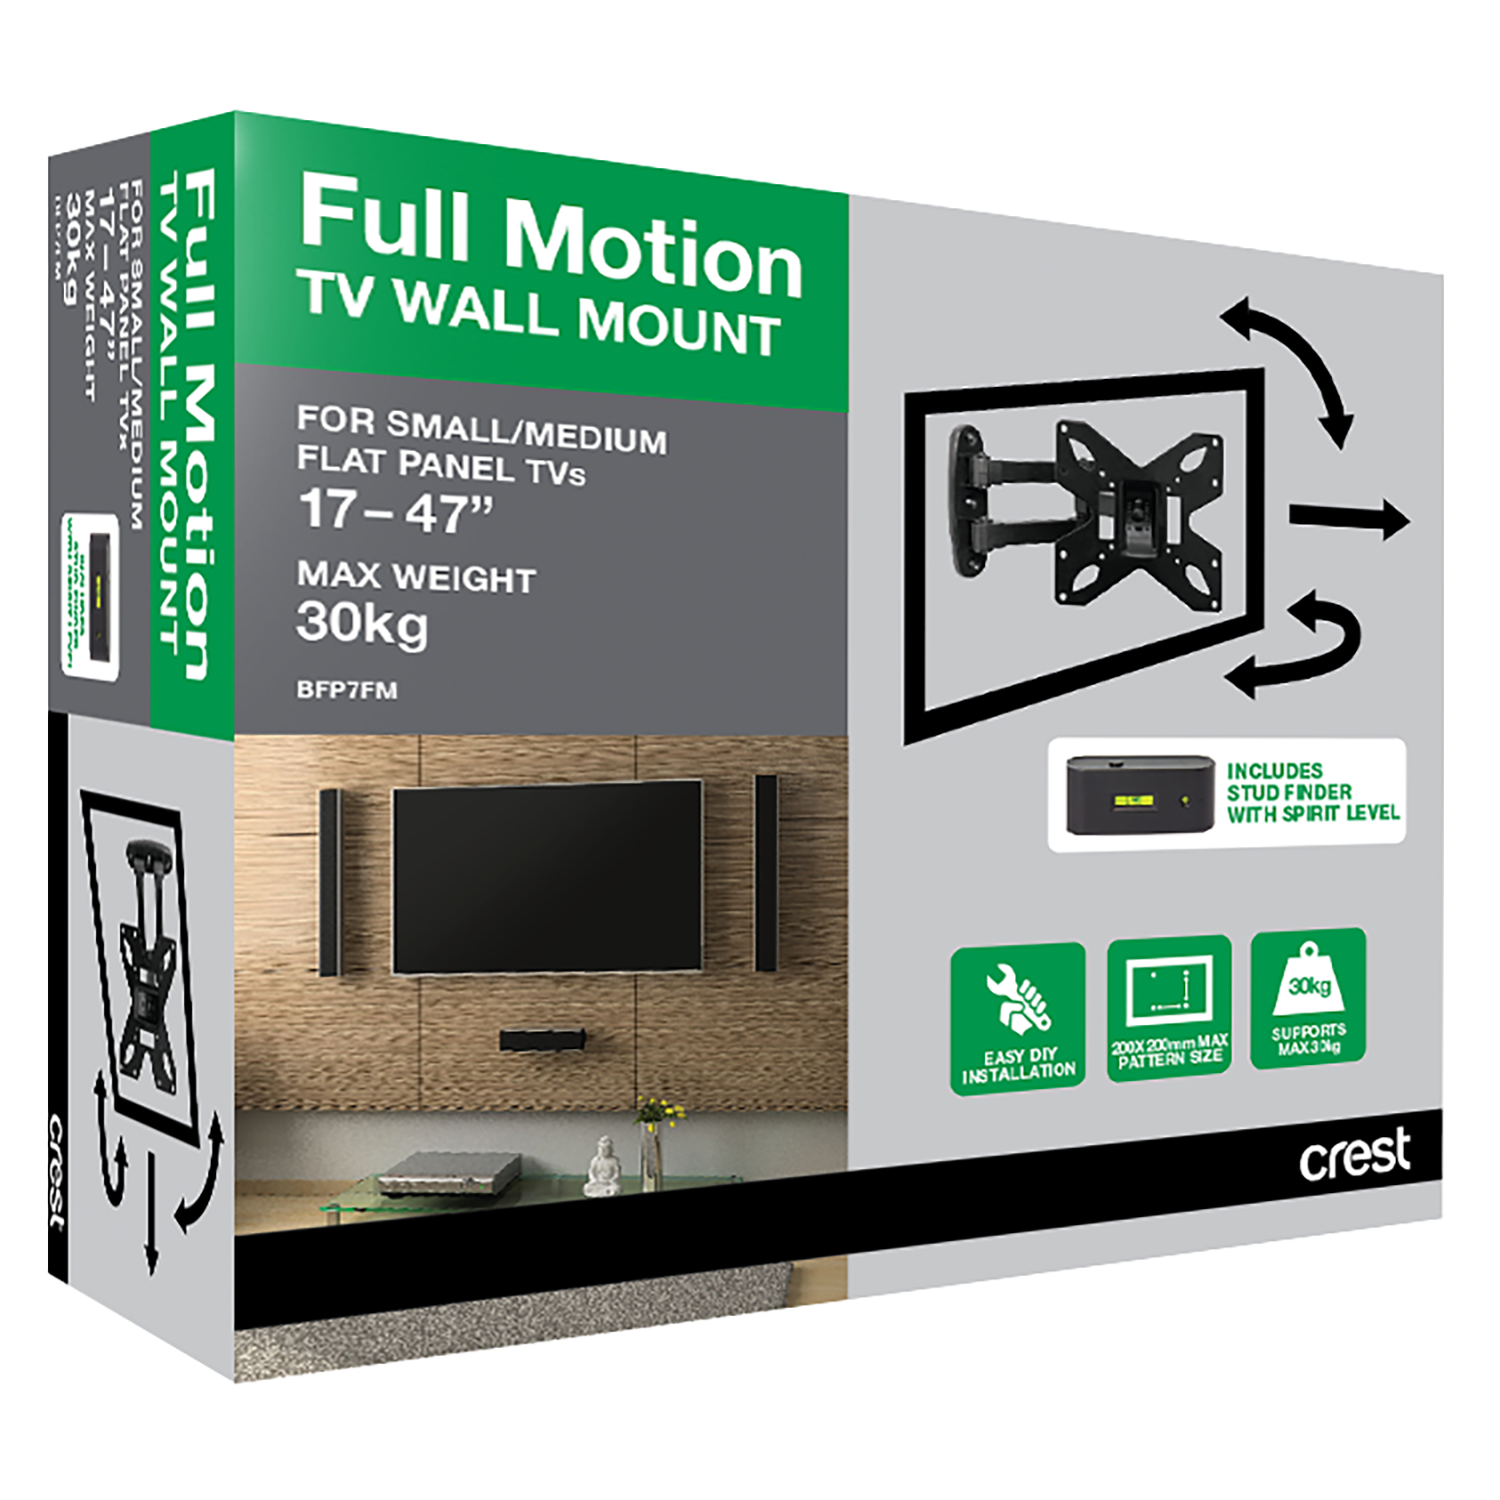 Full Motion TV Wall Mount - 17" to 47"